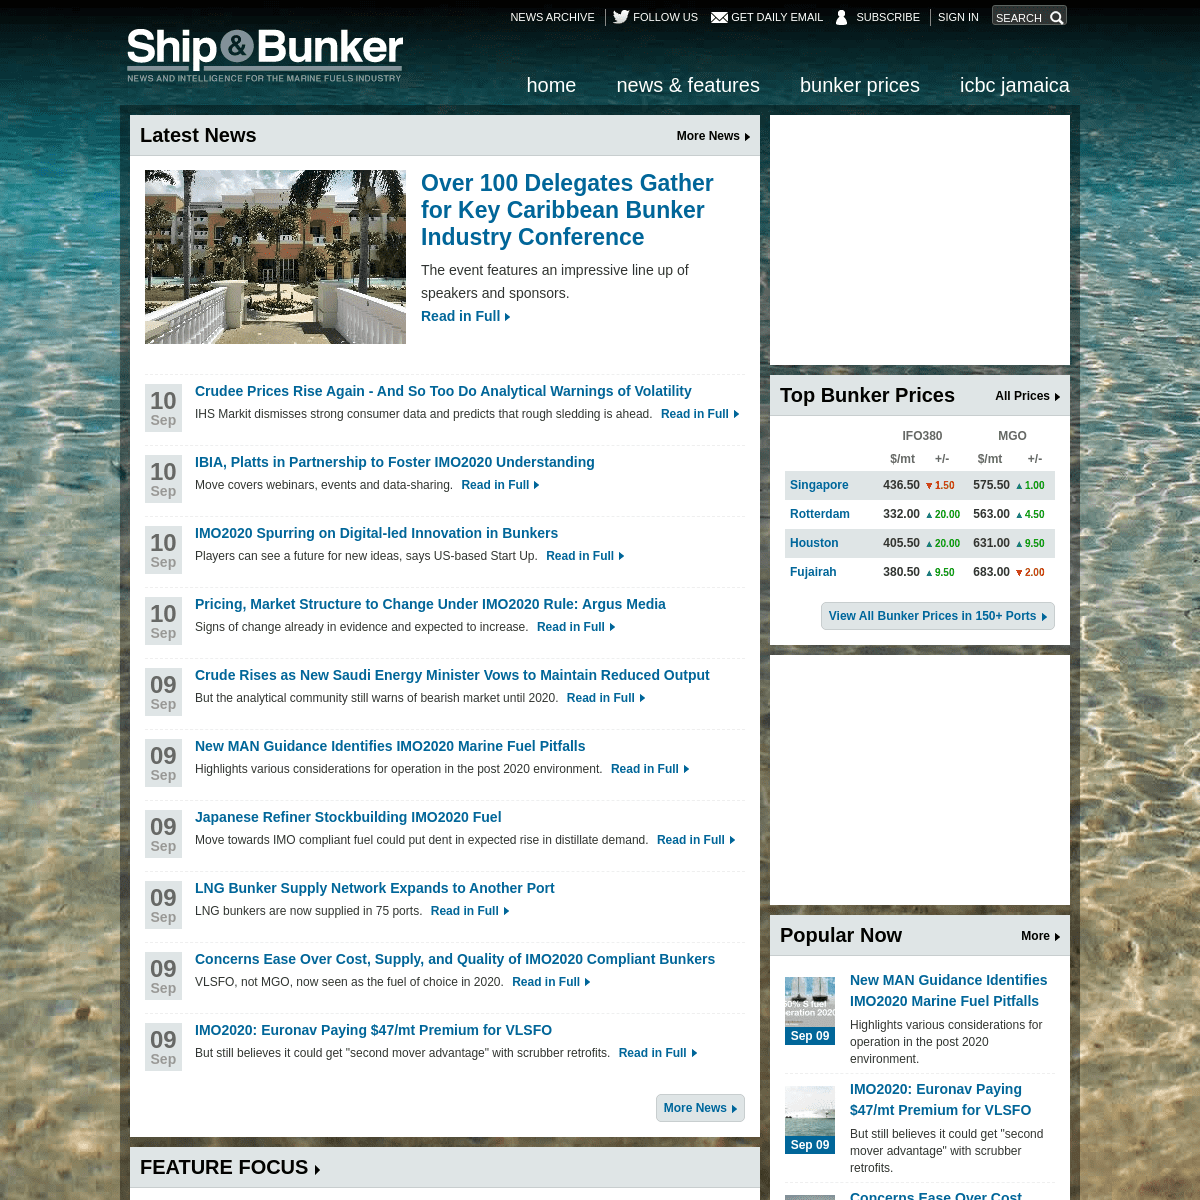 Ship & Bunker - Shipping News and Bunker Price Indications